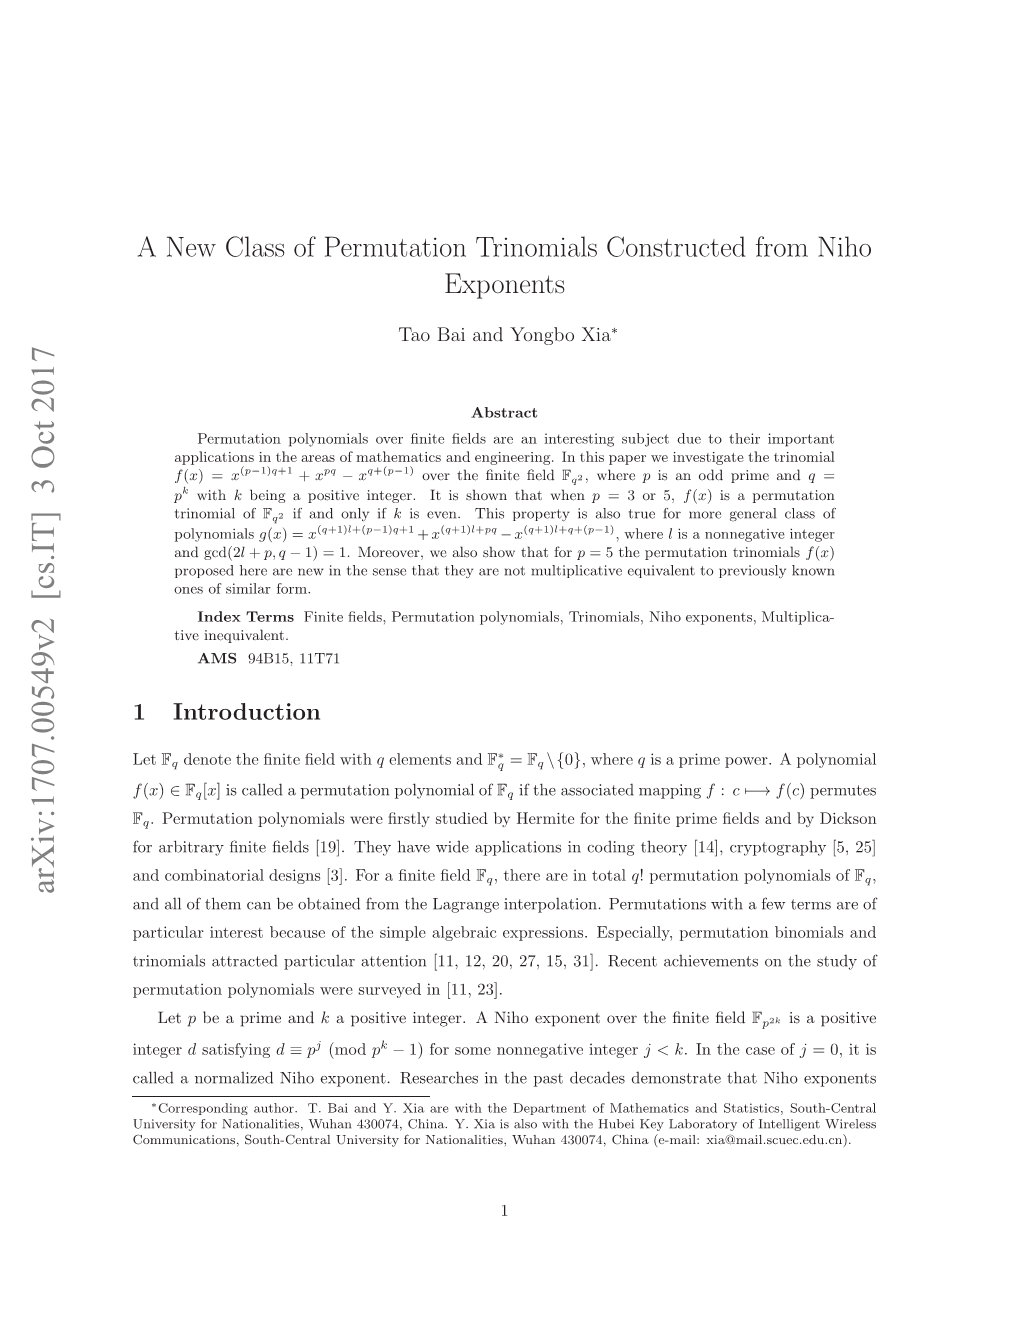 A New Class of Permutation Trinomials Constructed from Niho